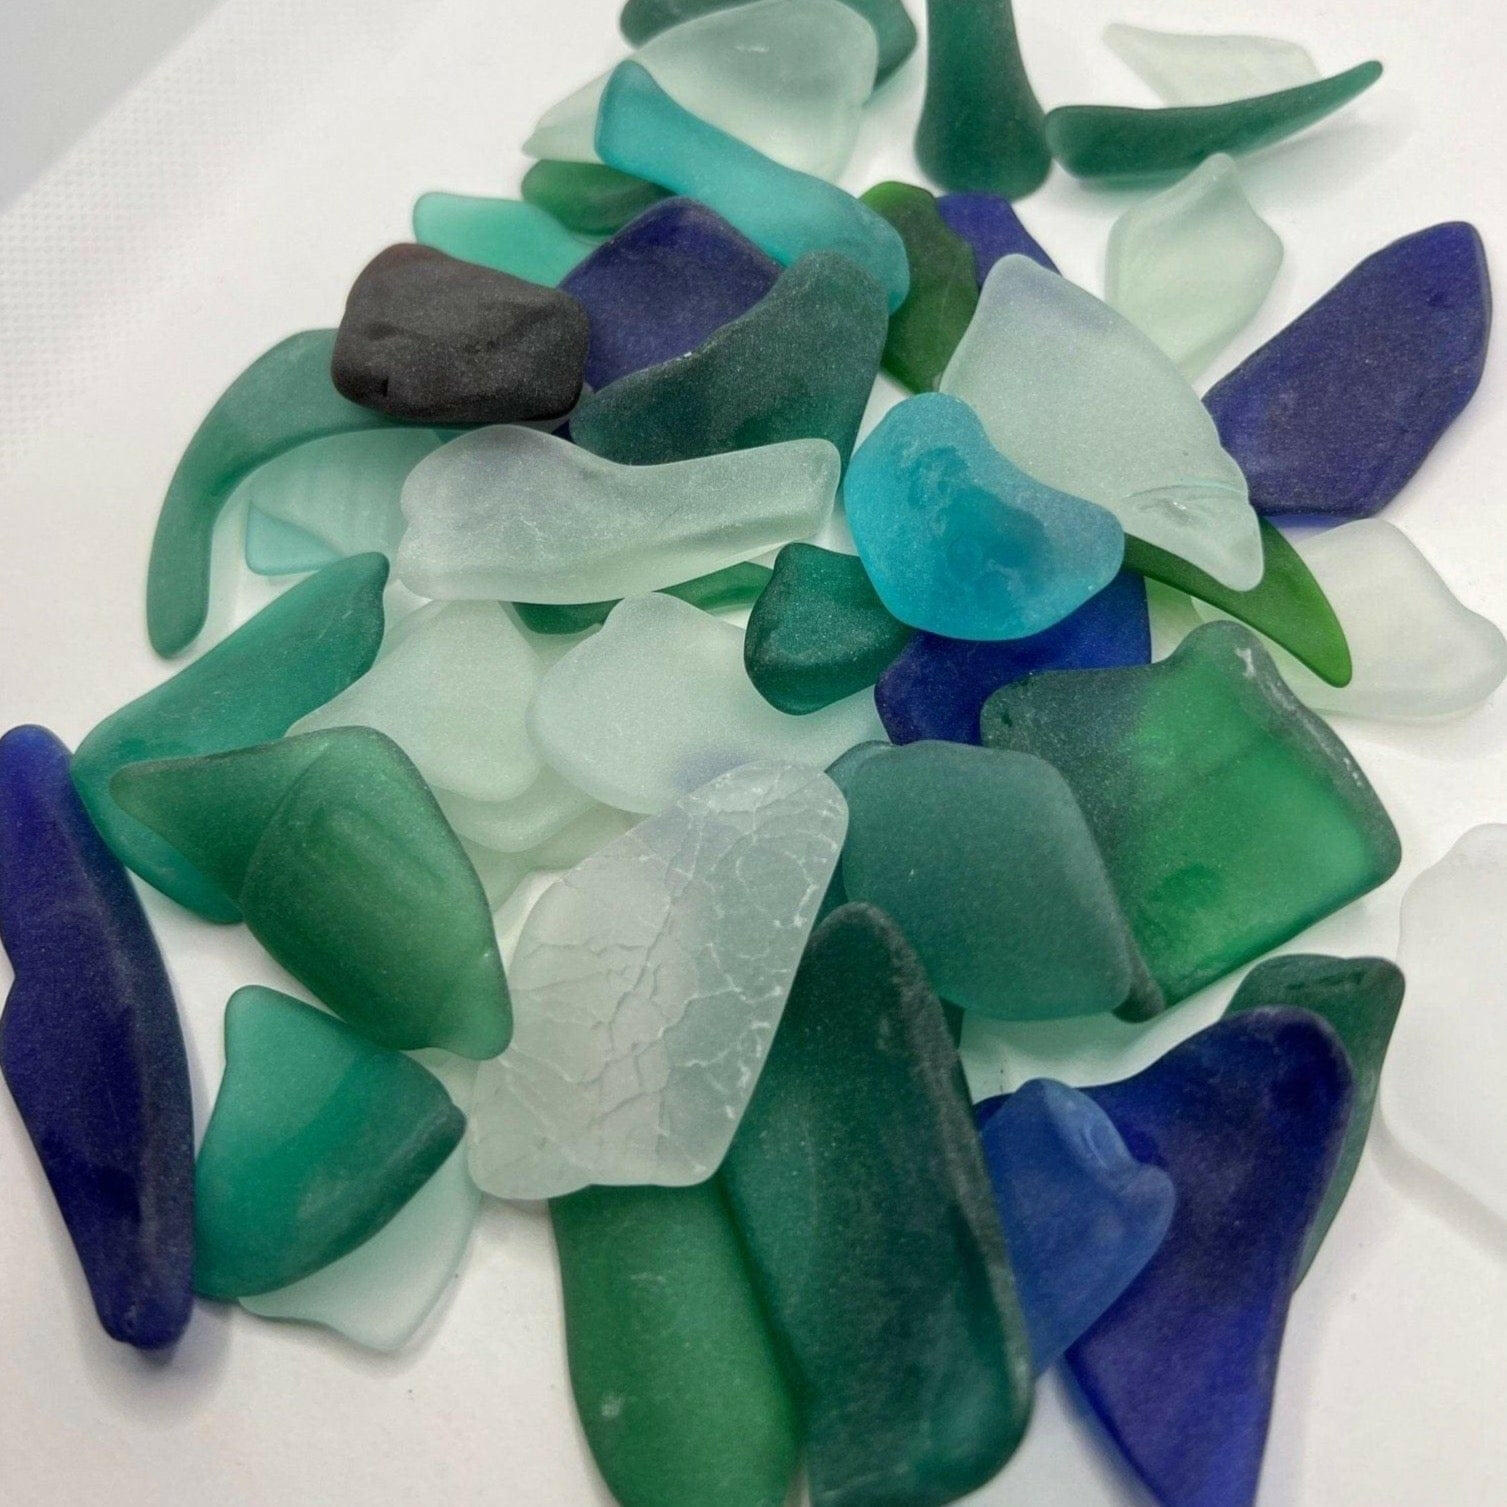 Bec Sue Jewelry Shop tumbled glass Mixed Sea Glass, Unpolished Tumbled Glass, Tumbled Sea Glass, Sea Glass Art Tags 481